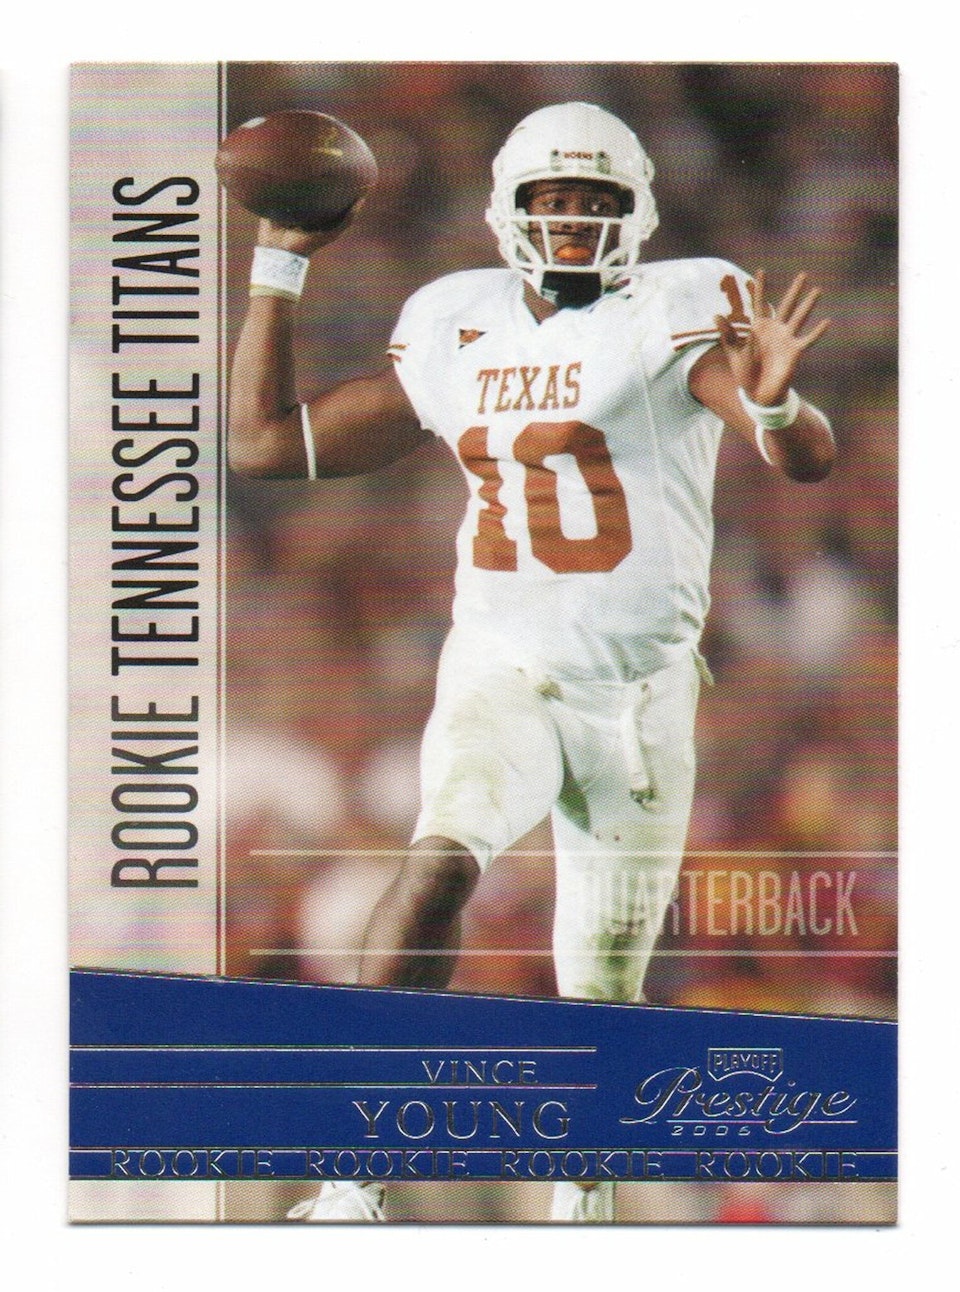 2006 Playoff Prestige #246 Vince Young RC (10-X343-NFLTITANS)